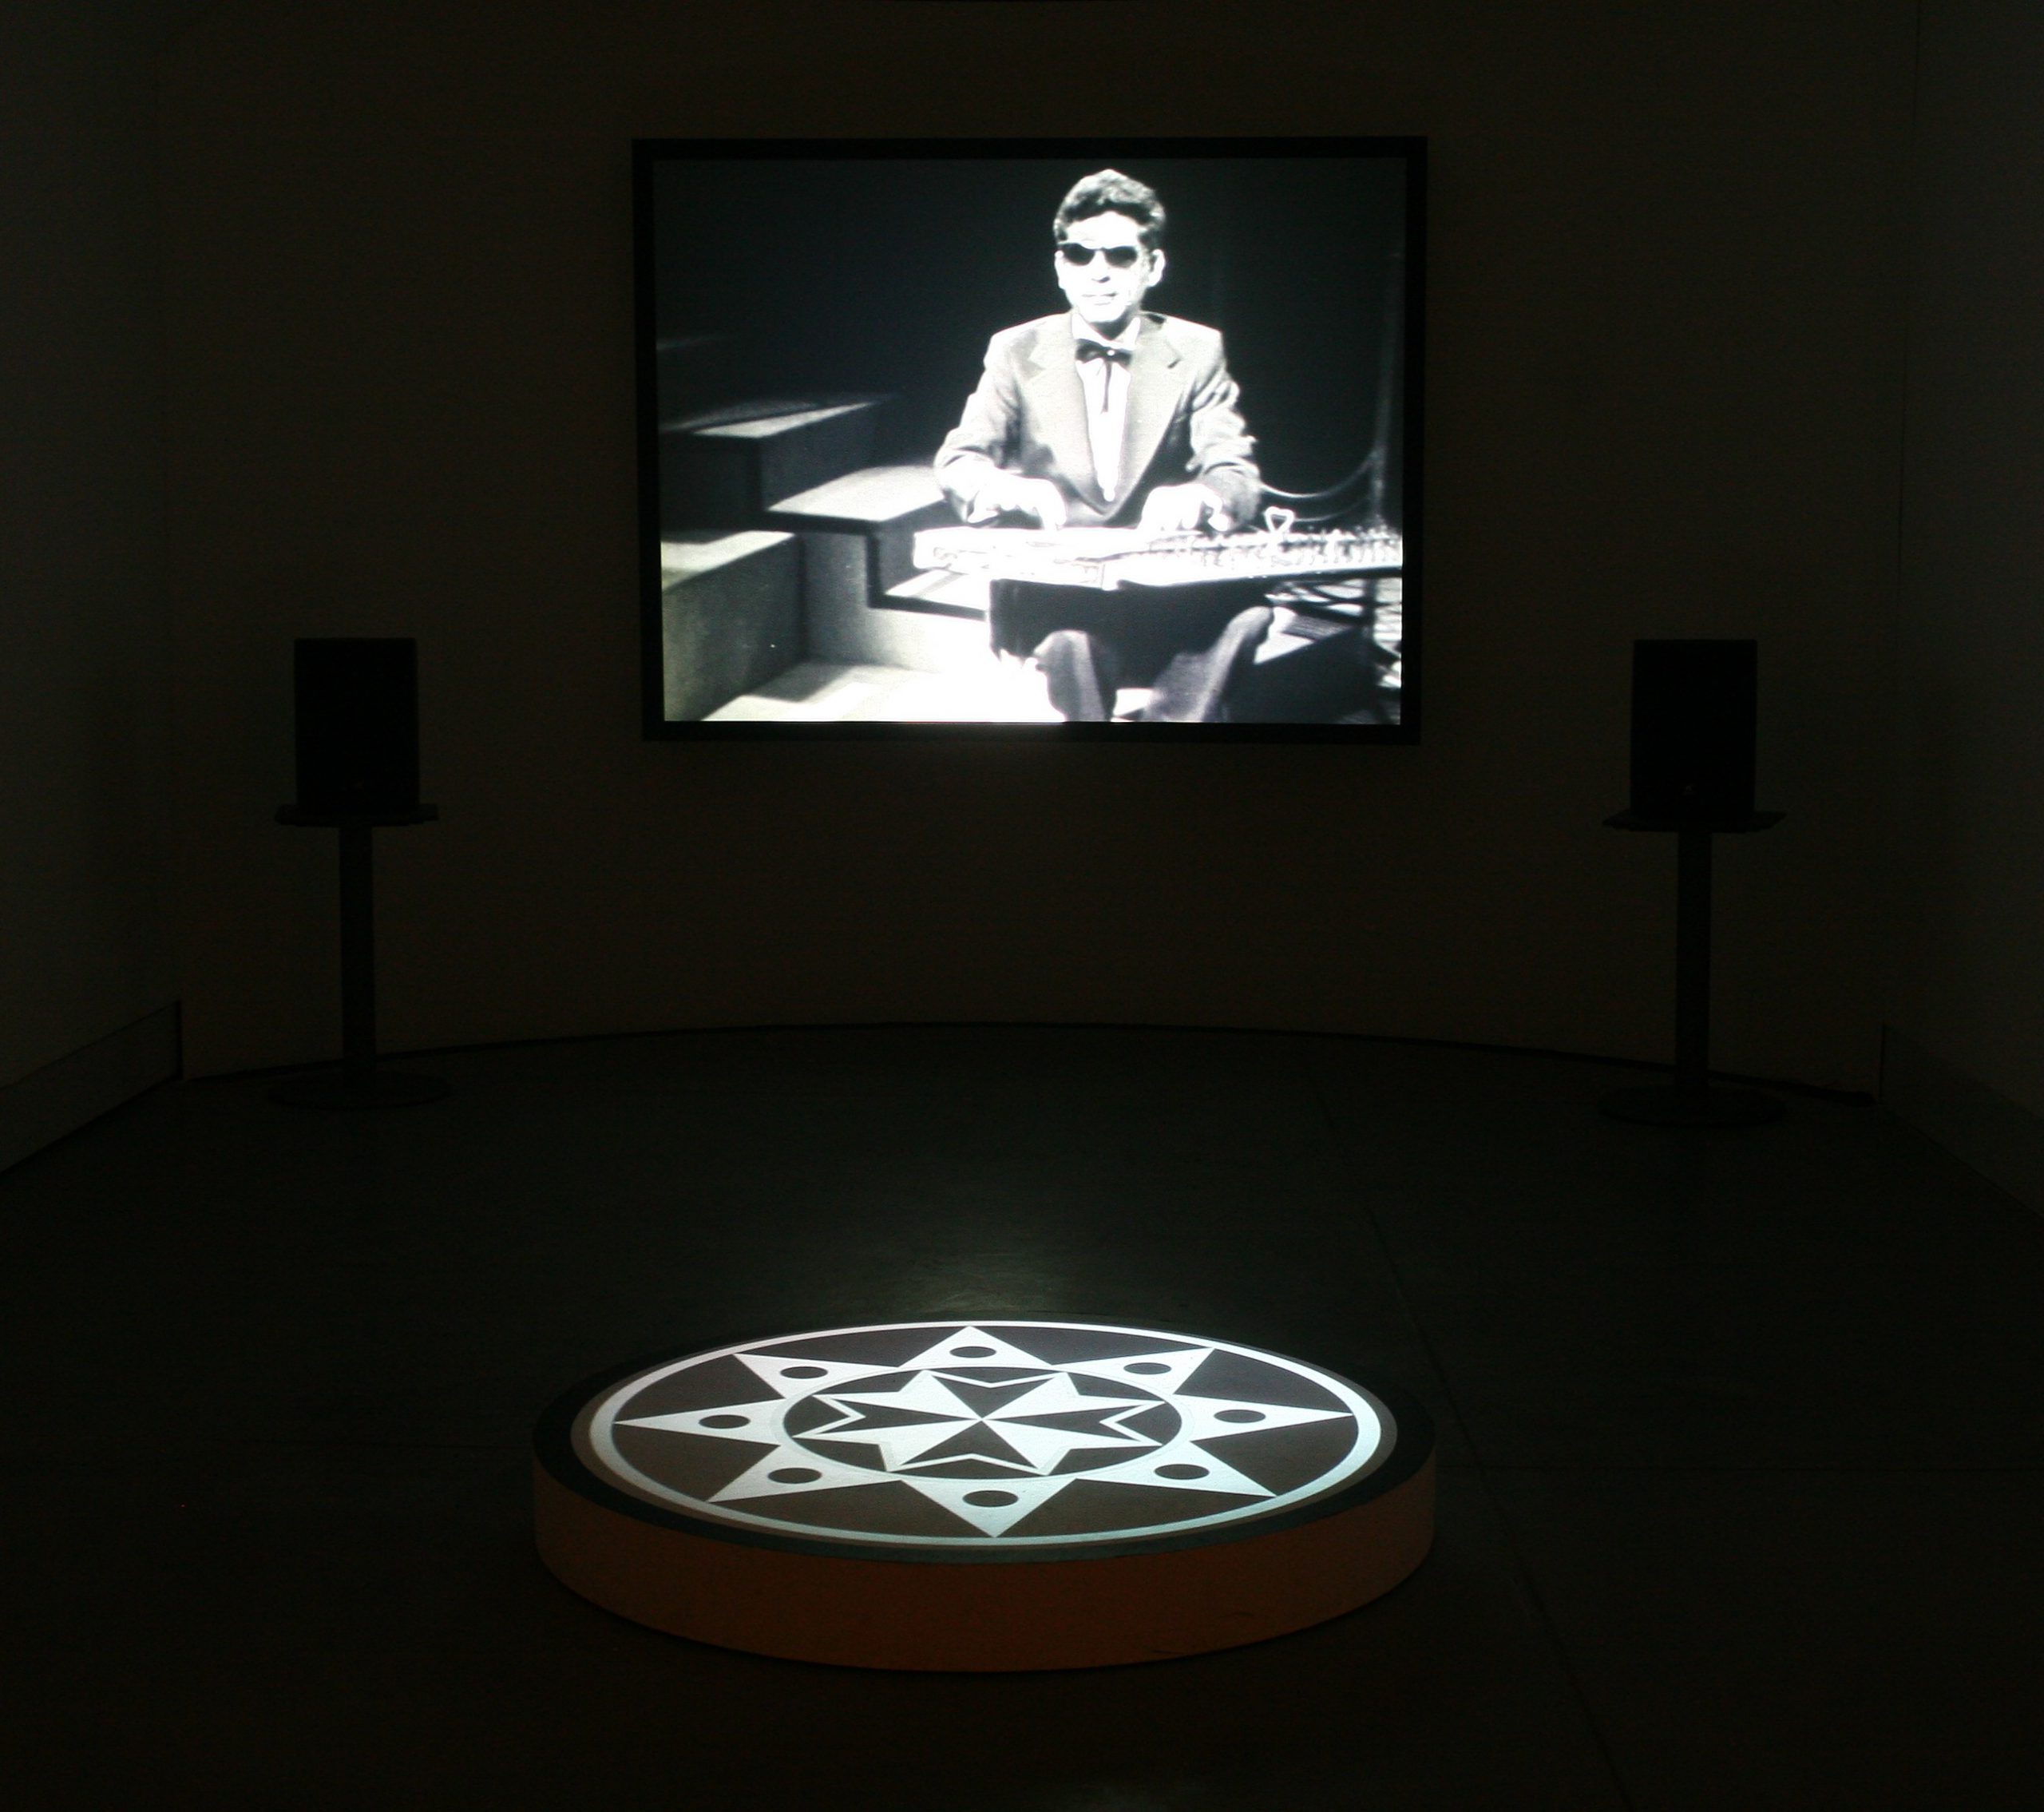 "A Great Joy Tonight", 2009, two-channel video installation projected on a wall and a round stage, black&white, stereo sound, duration 10:43 min, dimantions variable